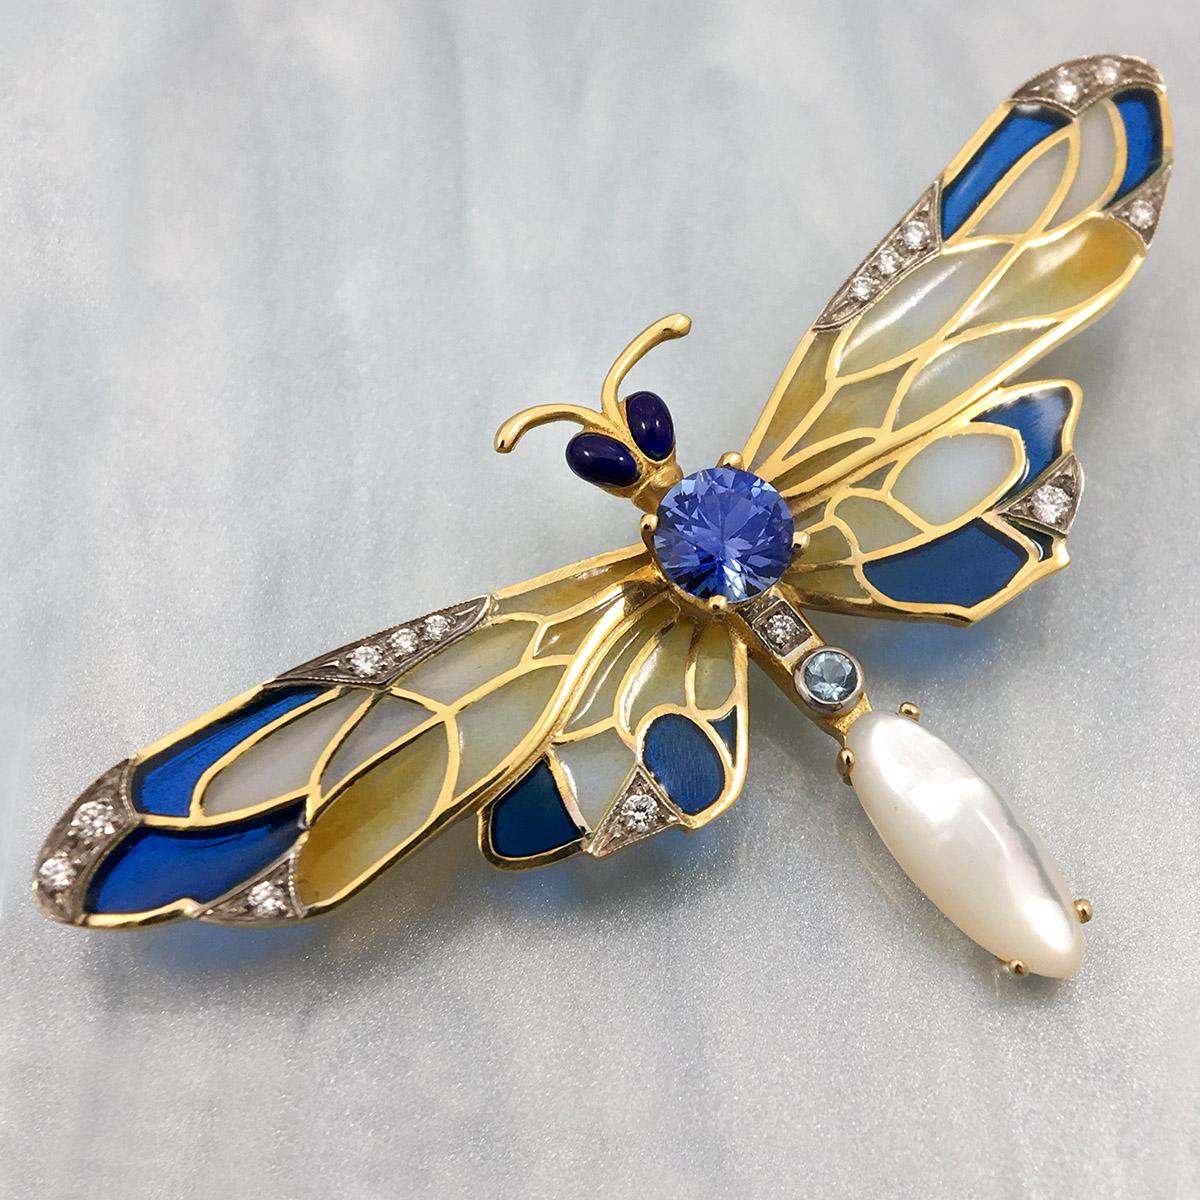 This stunning Masriera 18-karat yellow gold Dragonfly brooch/pendant has blue,white,and yellow plique-à-jour enameling on its wings.It is delicately detailed with brilliant-cut diamonds, a round blue sapphire,a round aquamarine, and a marquis shaped